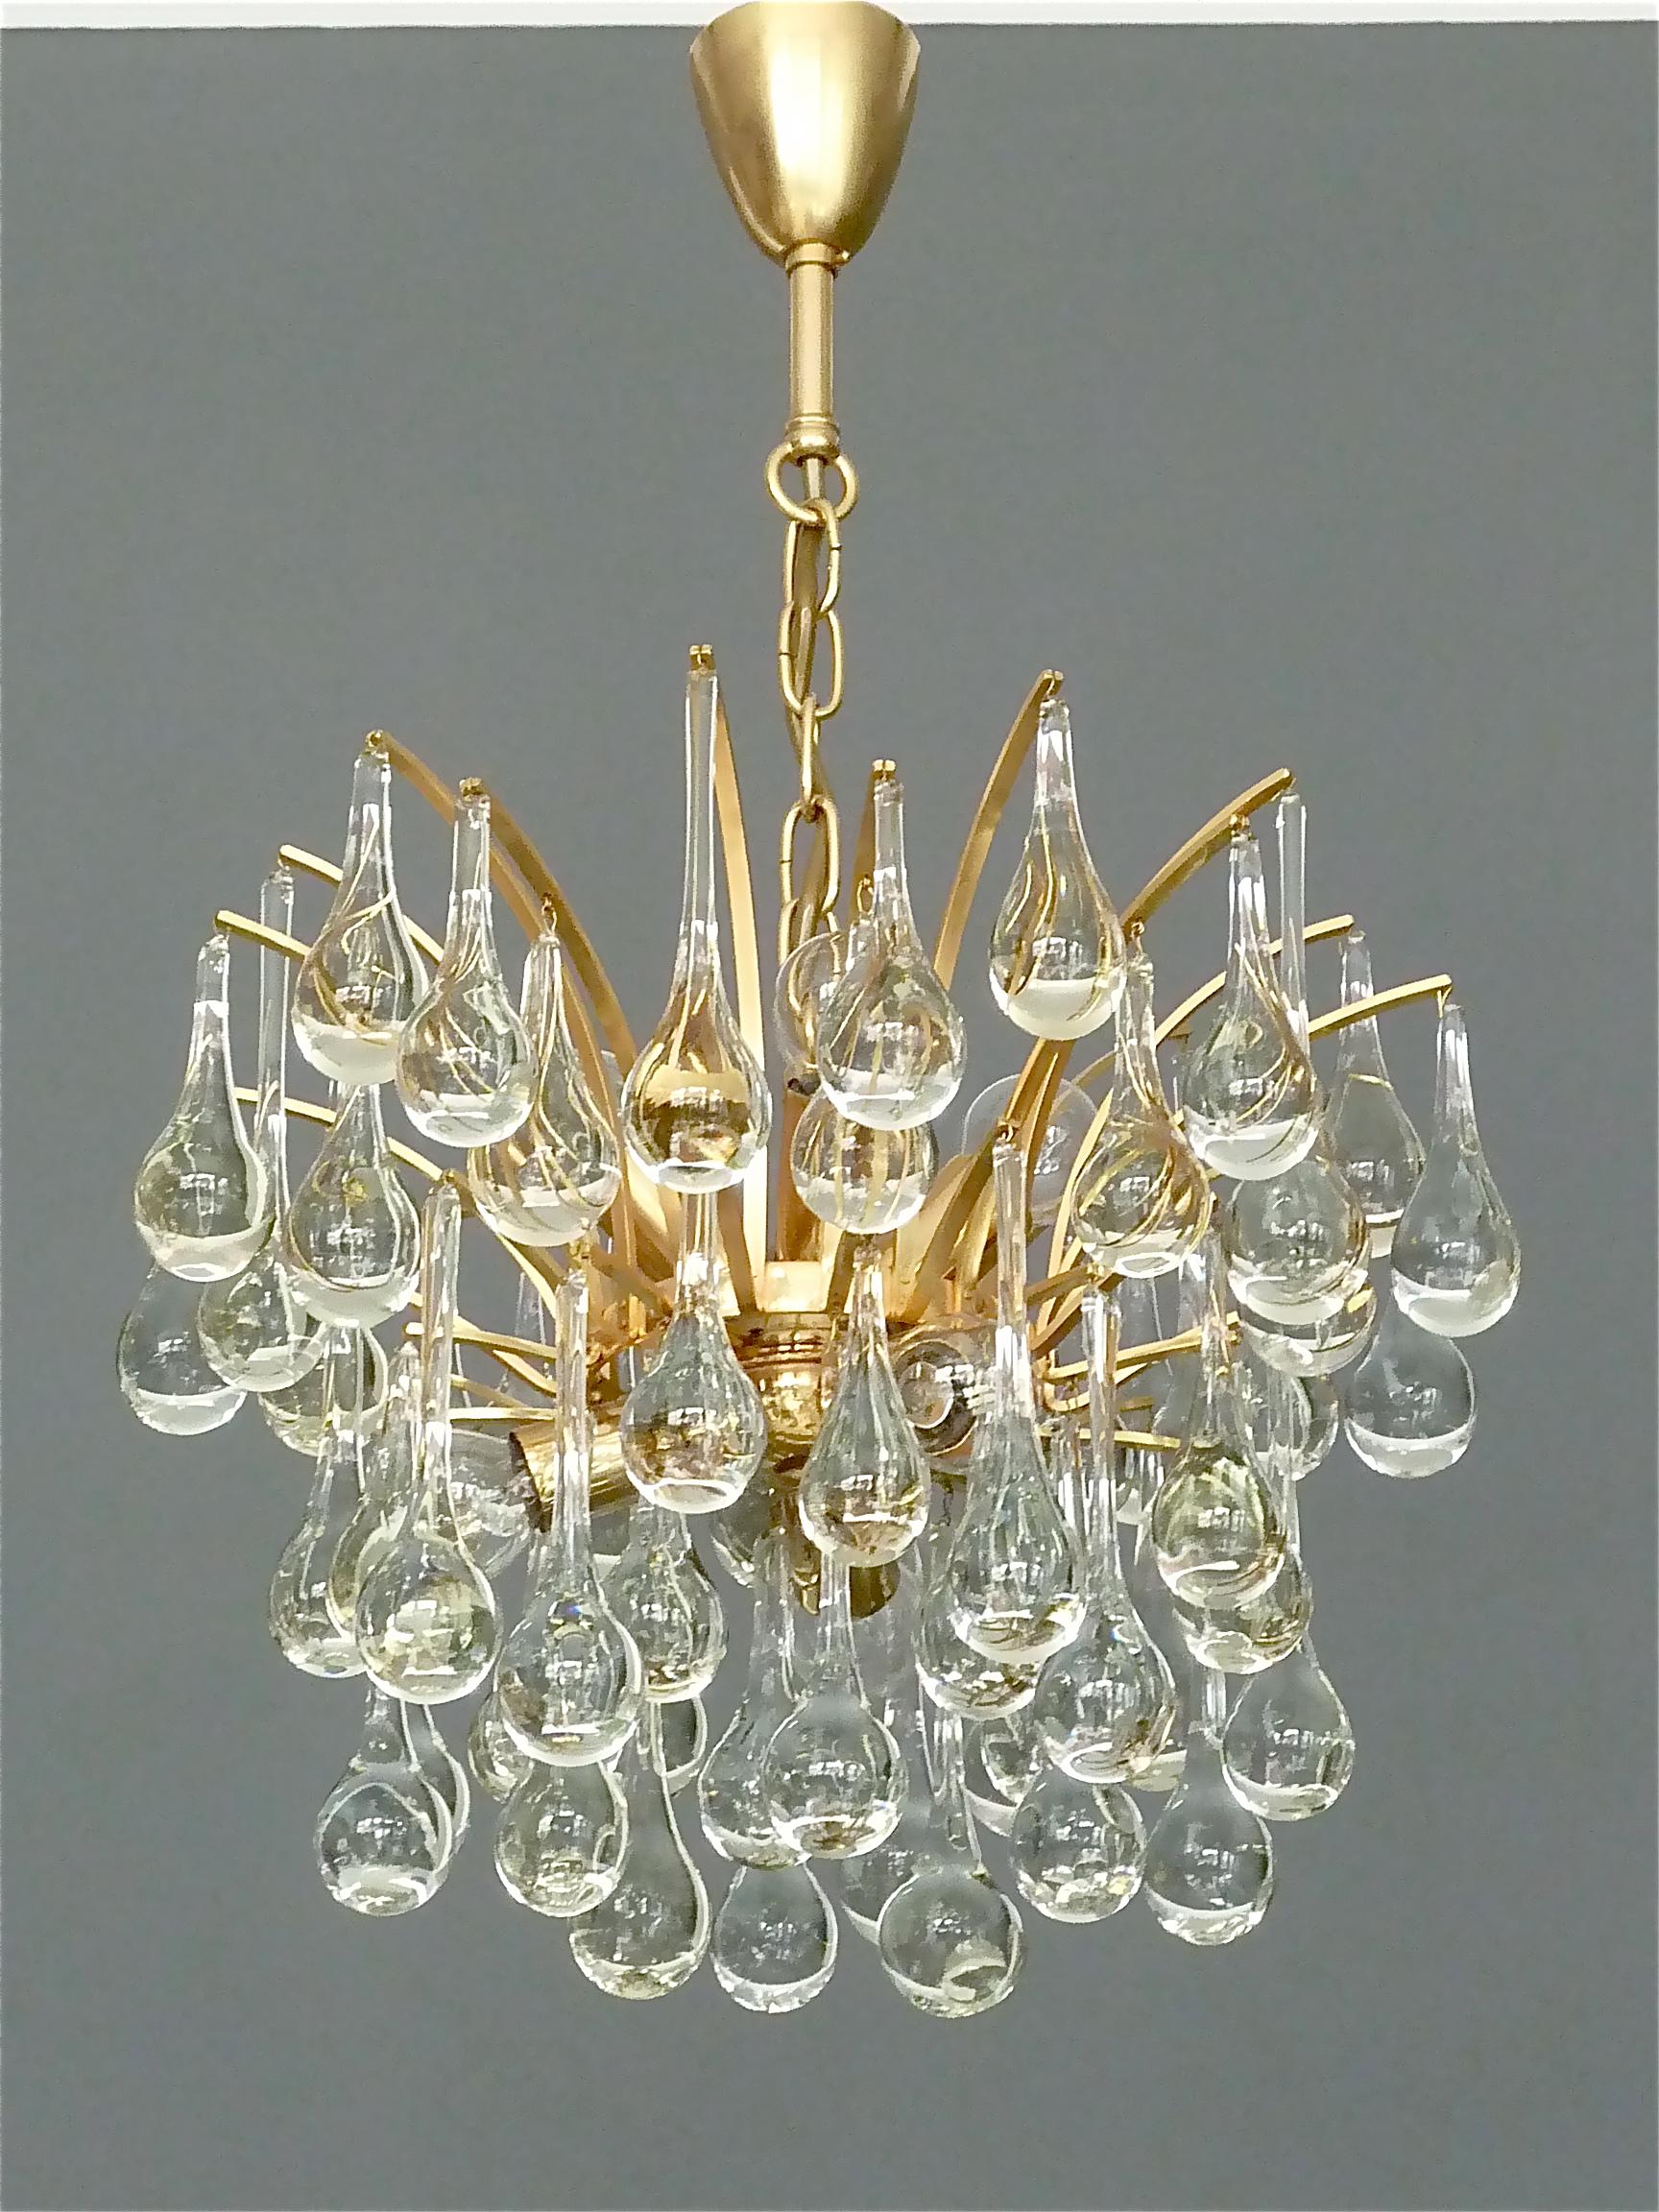 Large gilt brass sputnik chandelier with elongated murano glass made by Christoph Palme, very in the style of Venini, Germany, circa 1960-1970. The chain-hanging length-adjustable pendant lamp has a gilt brass metal Sputnik construction with